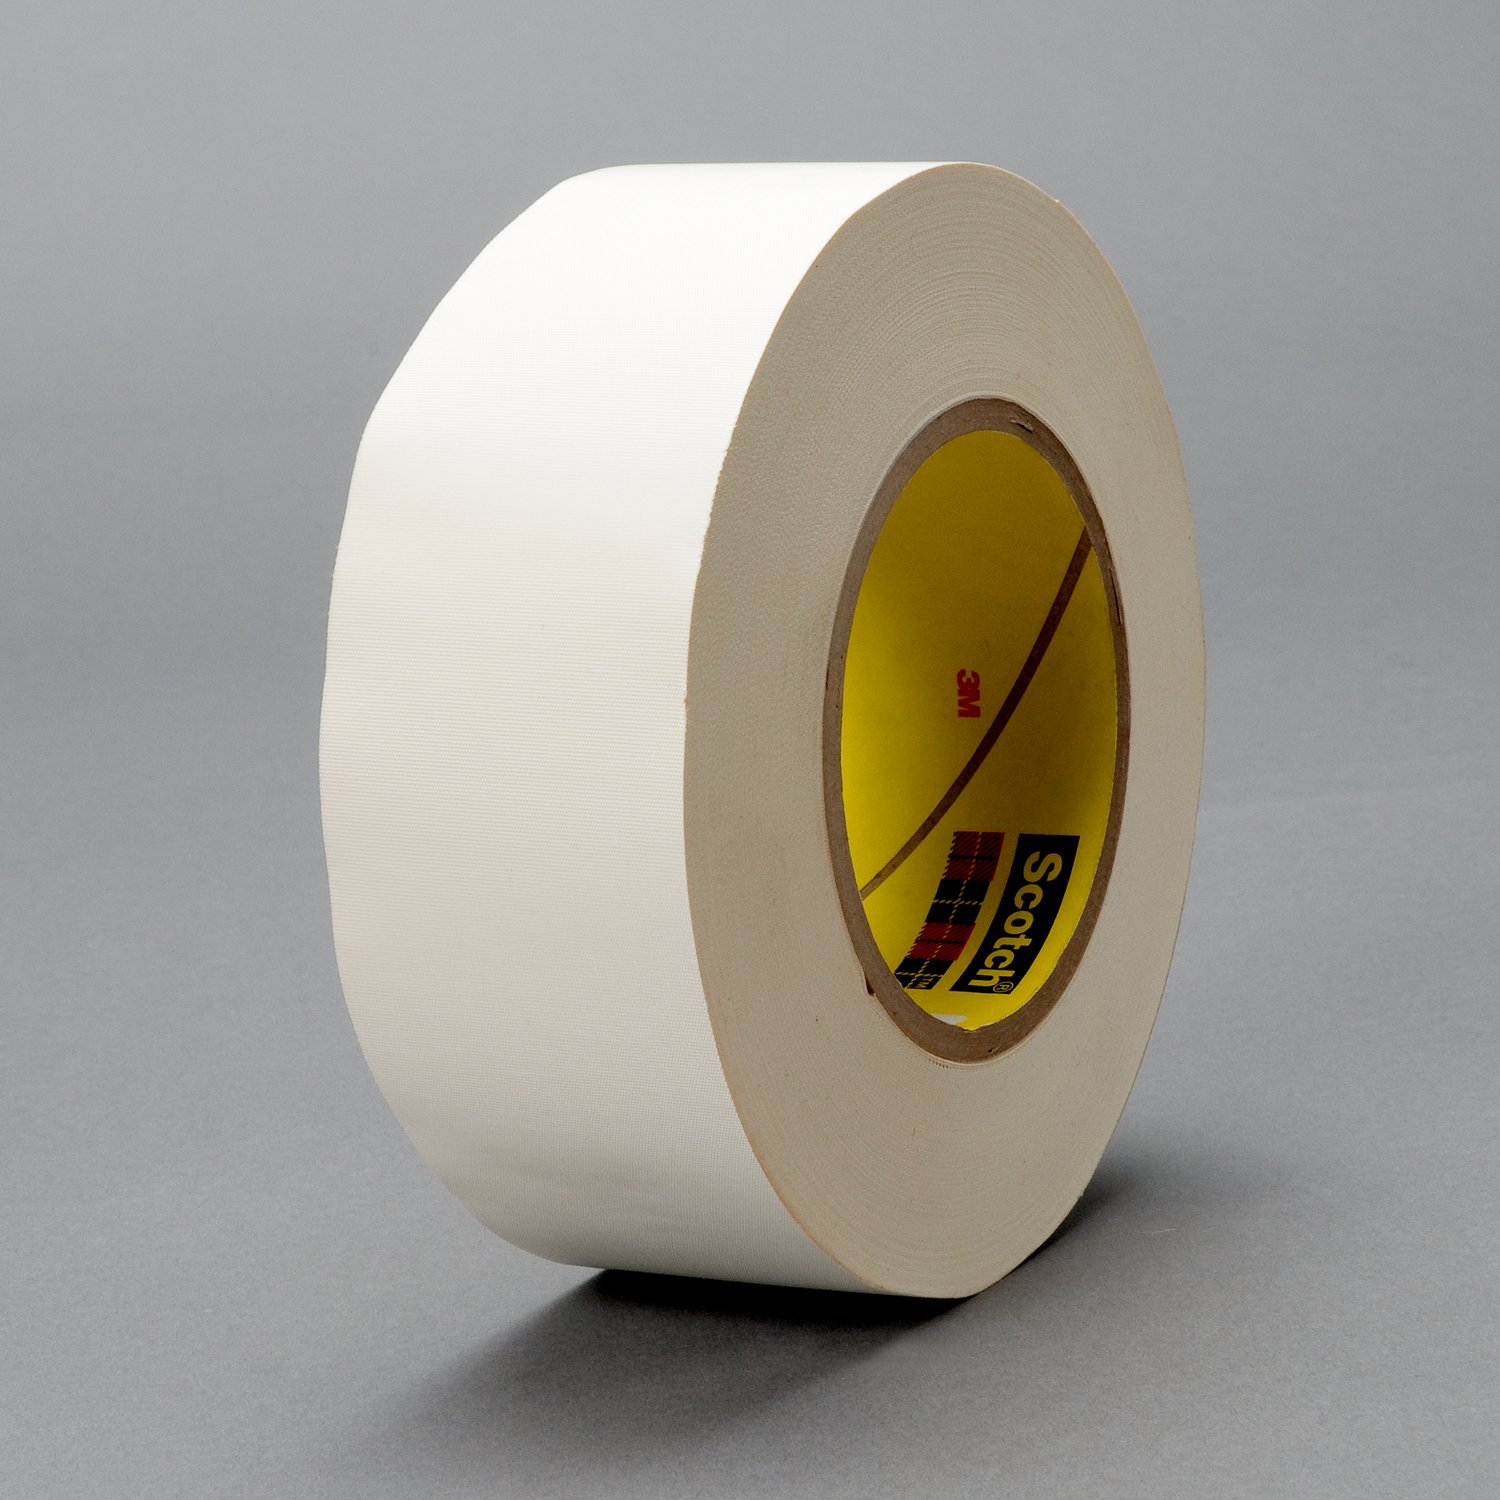 7010373816 - 3M Thermosetable Glass Cloth Tape 365, White, 1 1/2 in x 60 yd, 8.3
mil, 24 rolls per case